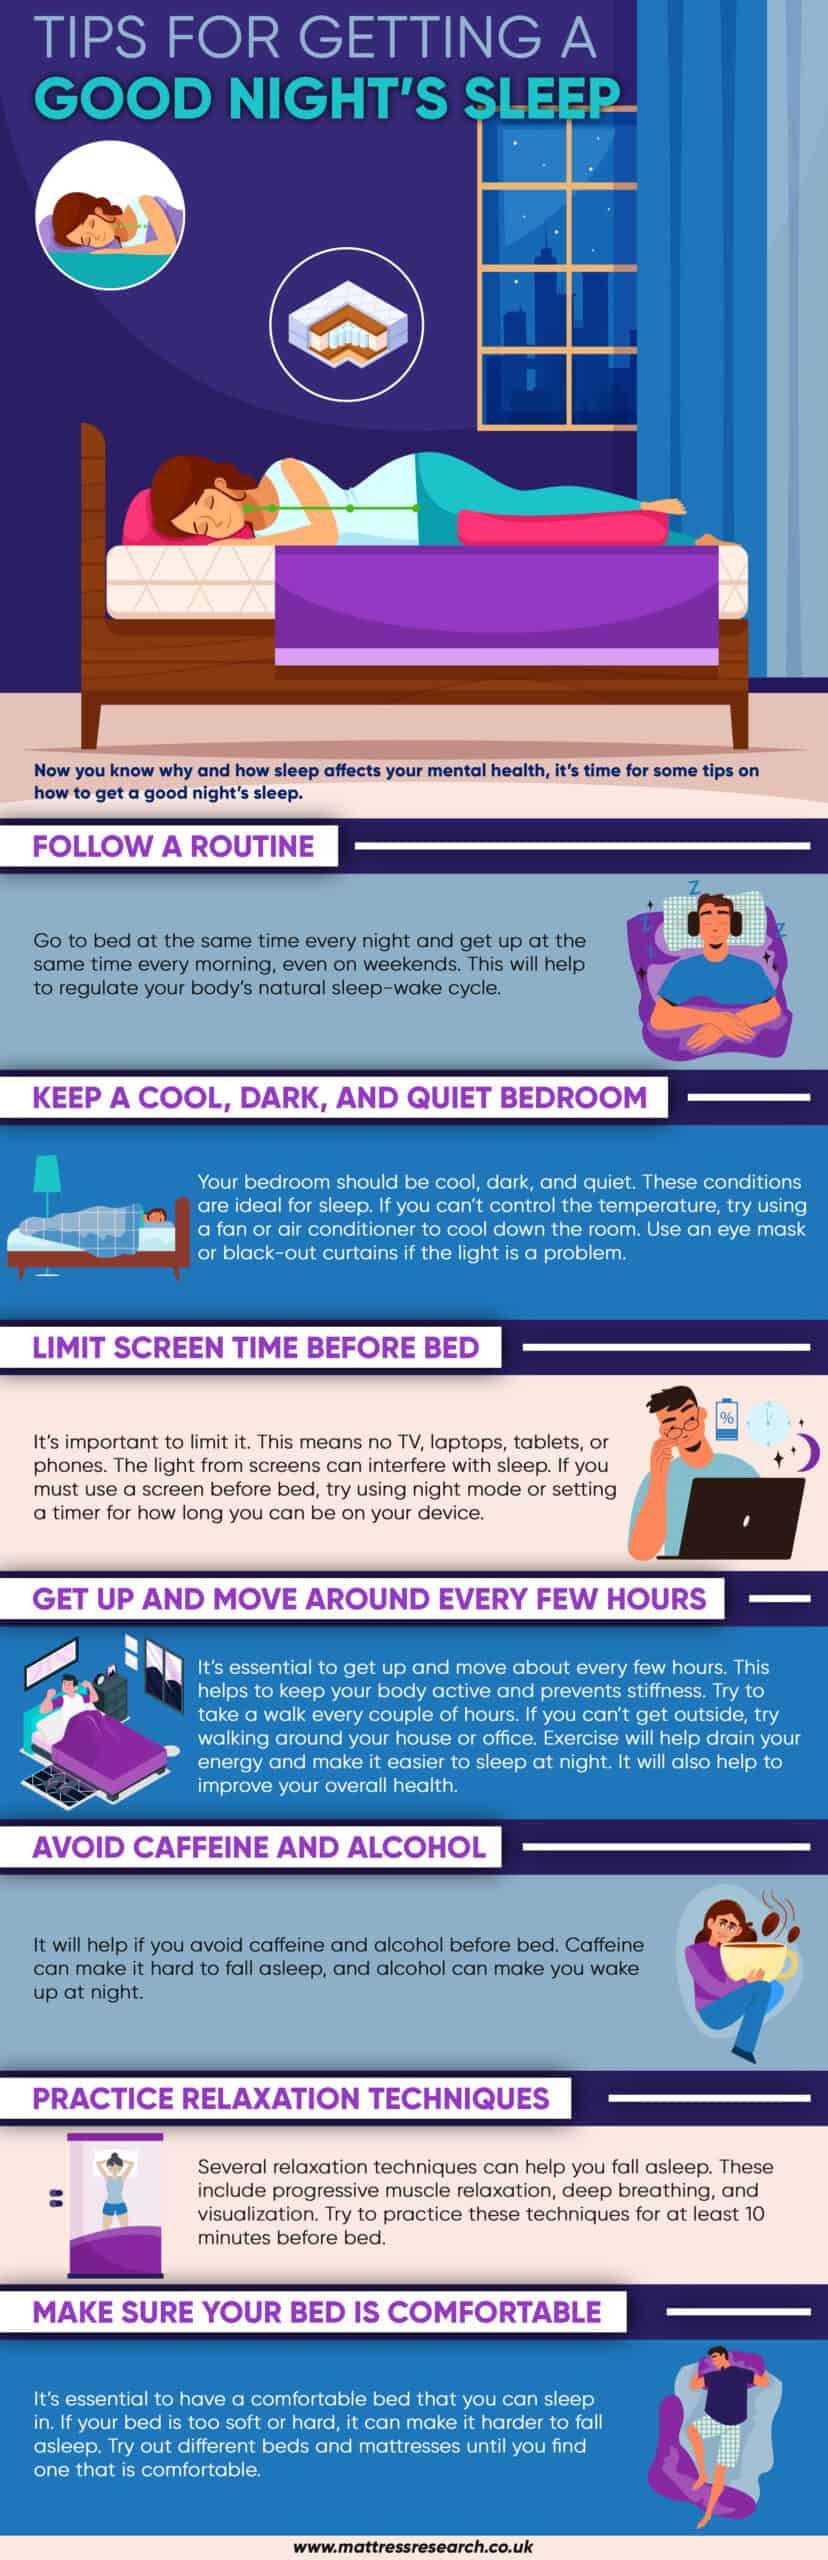 Tips for getting a good nights sleep scaled